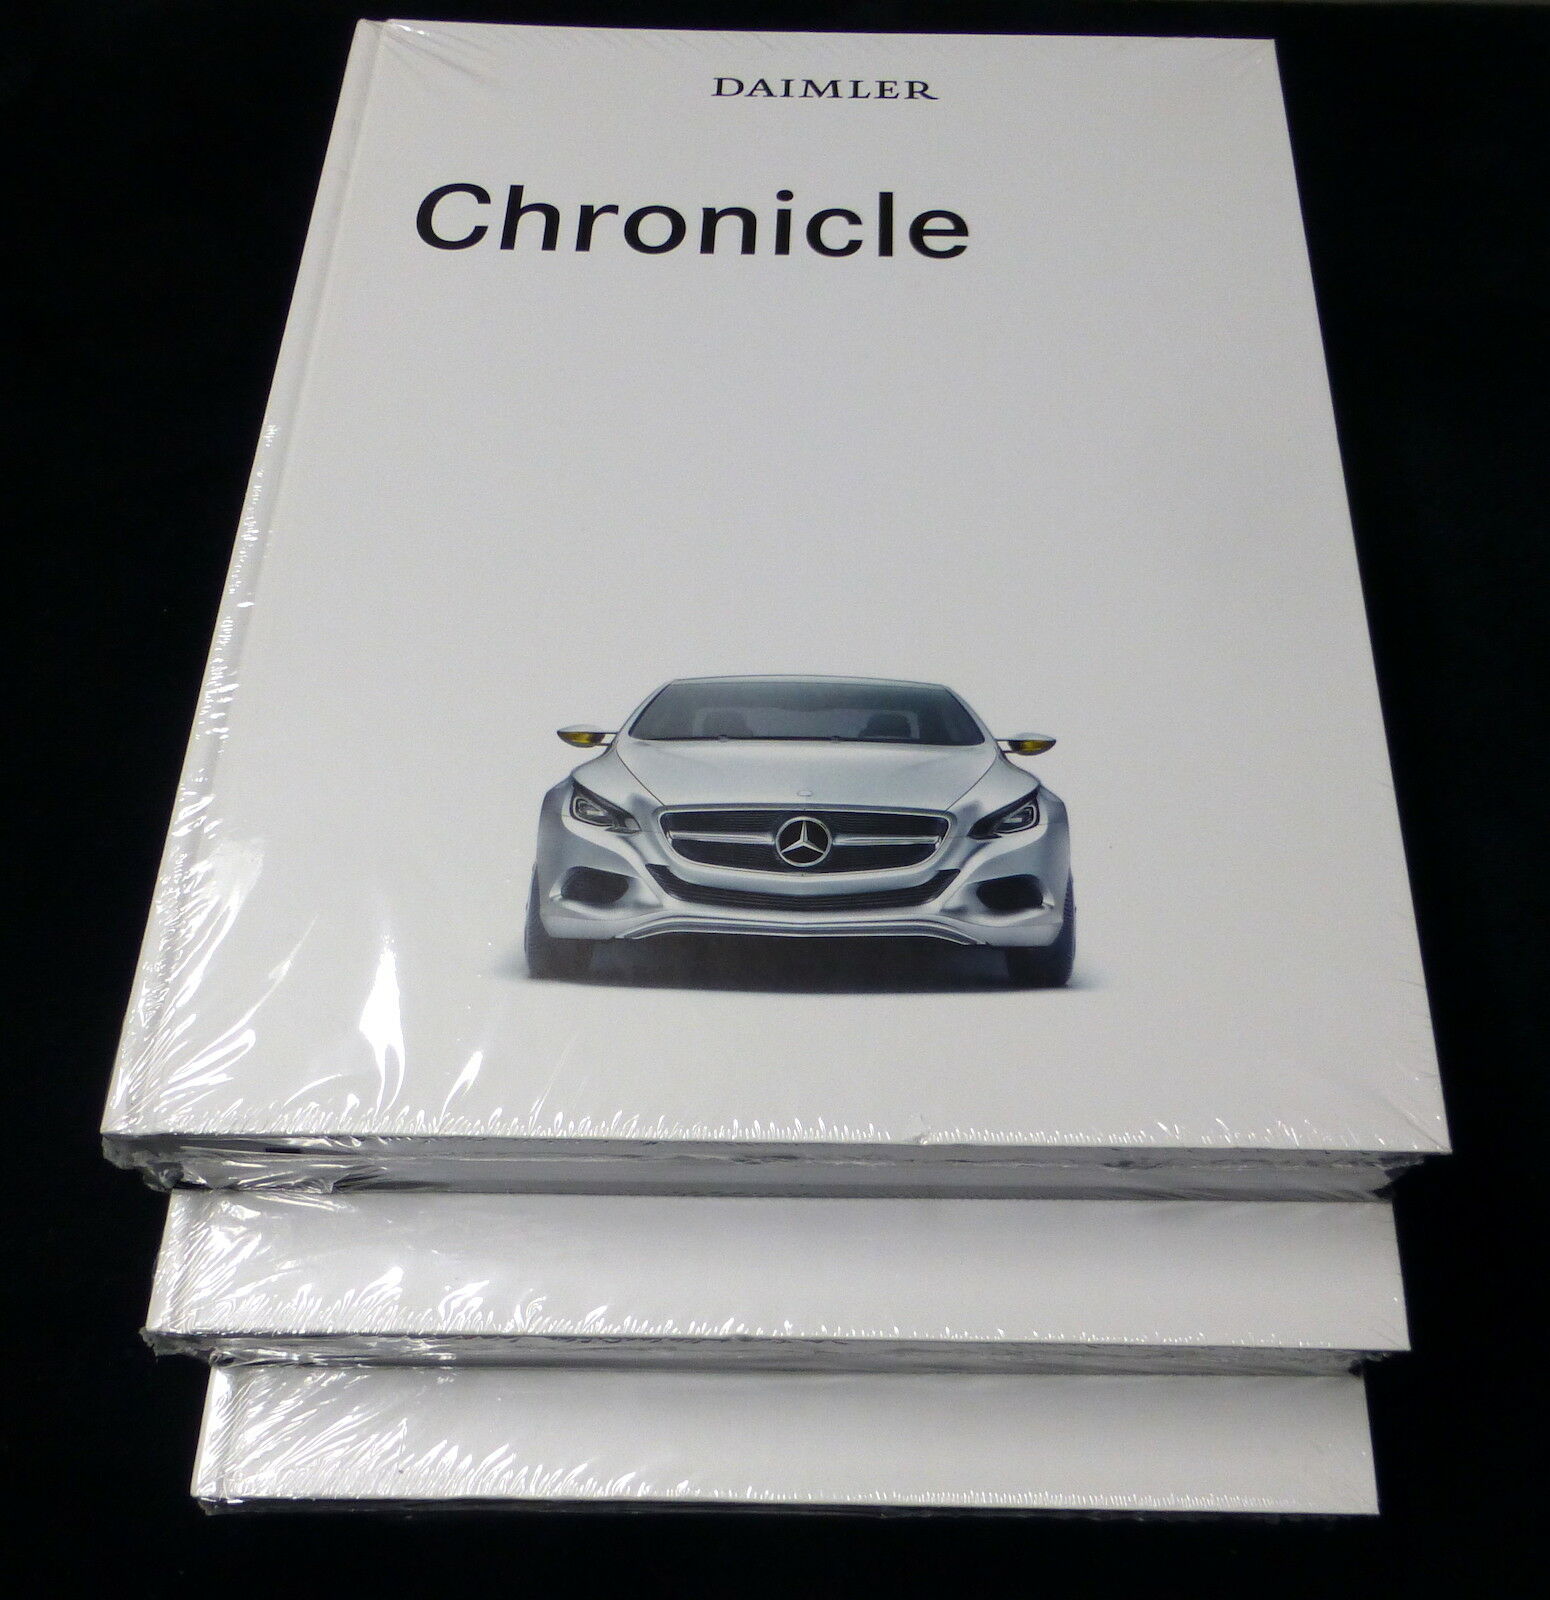 Daimler Chronicle Hardcover Book New In Plastic. Mercedes-benz History. Rare